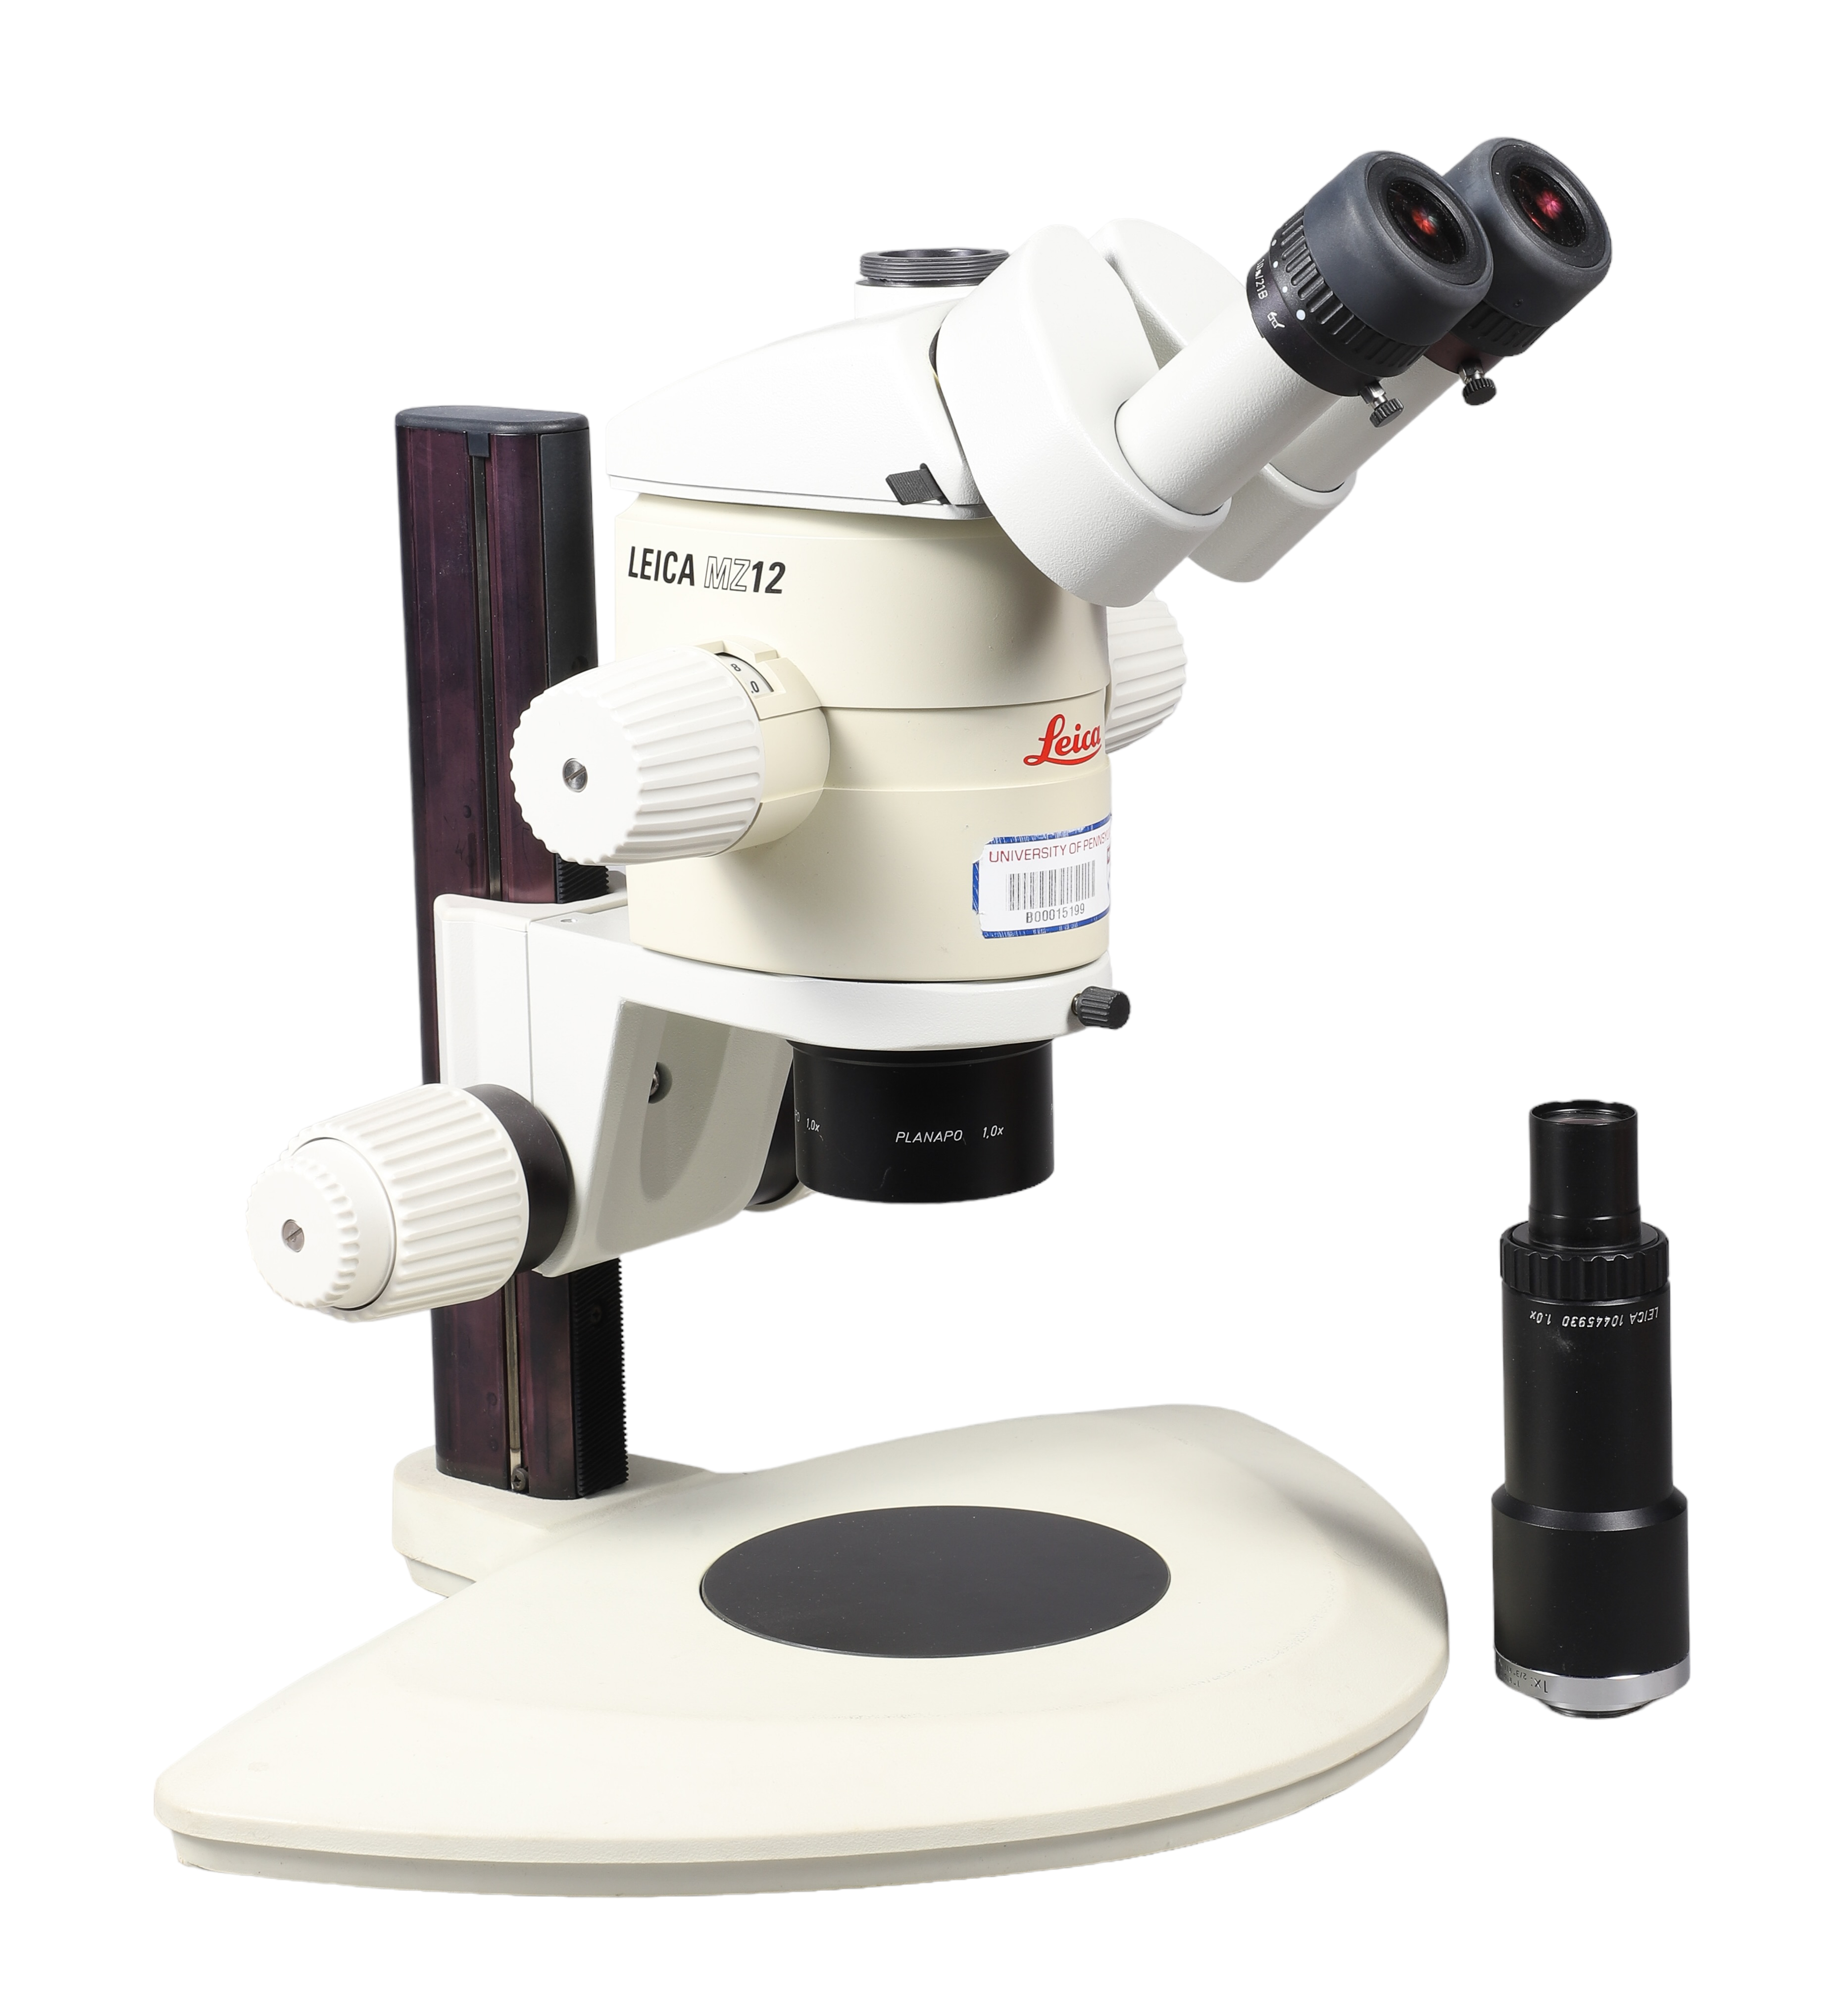 Leica Stereo Microscope MZ12 with